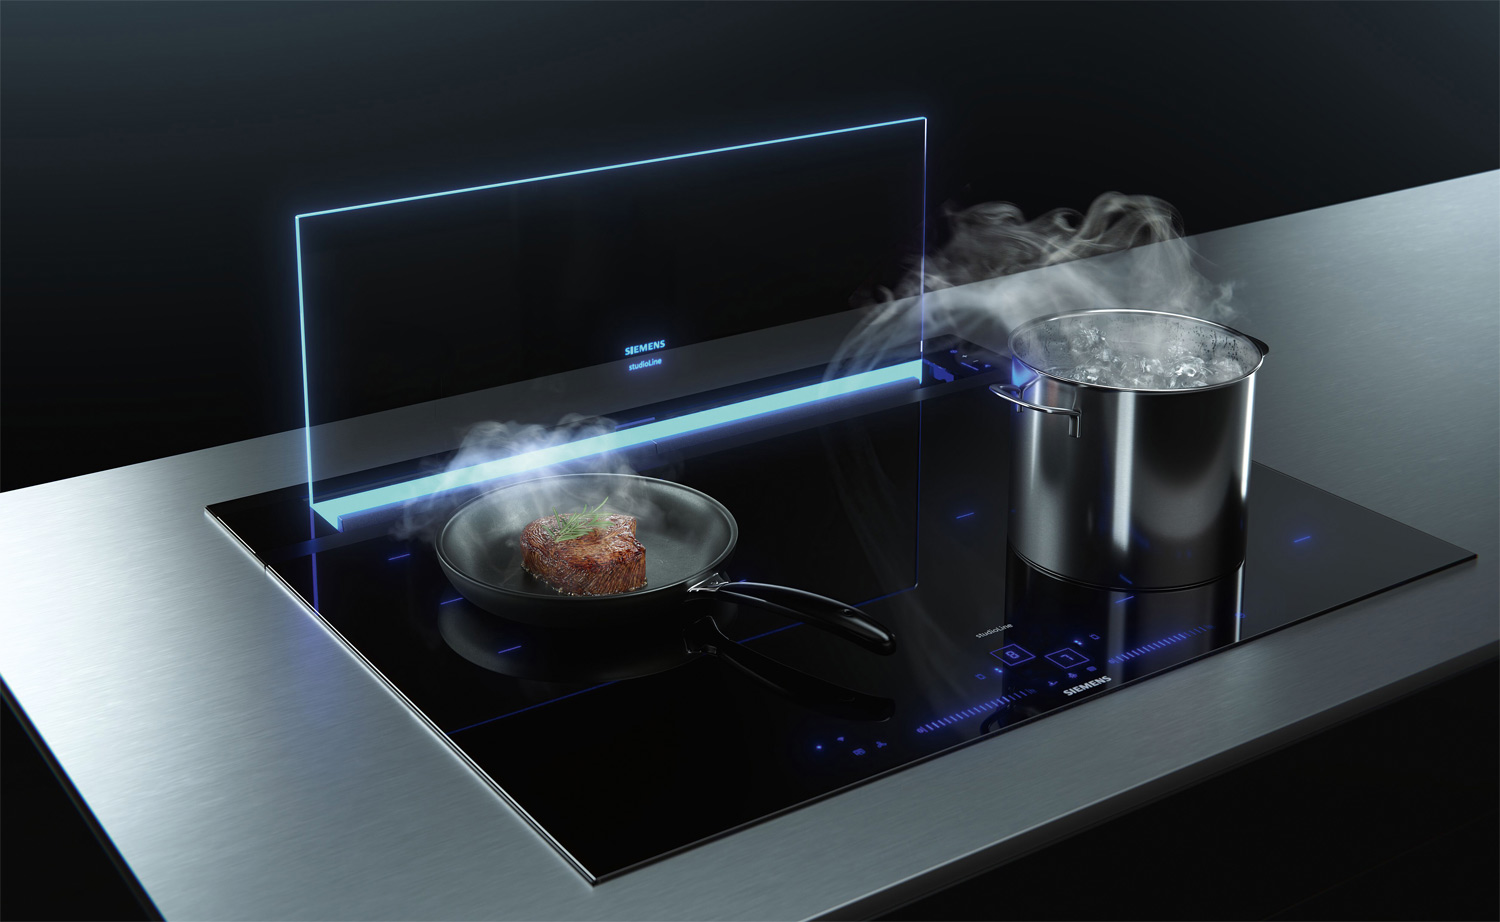 The New GlassdraftAir Siemens Brings A Of Wow To The Kitchen